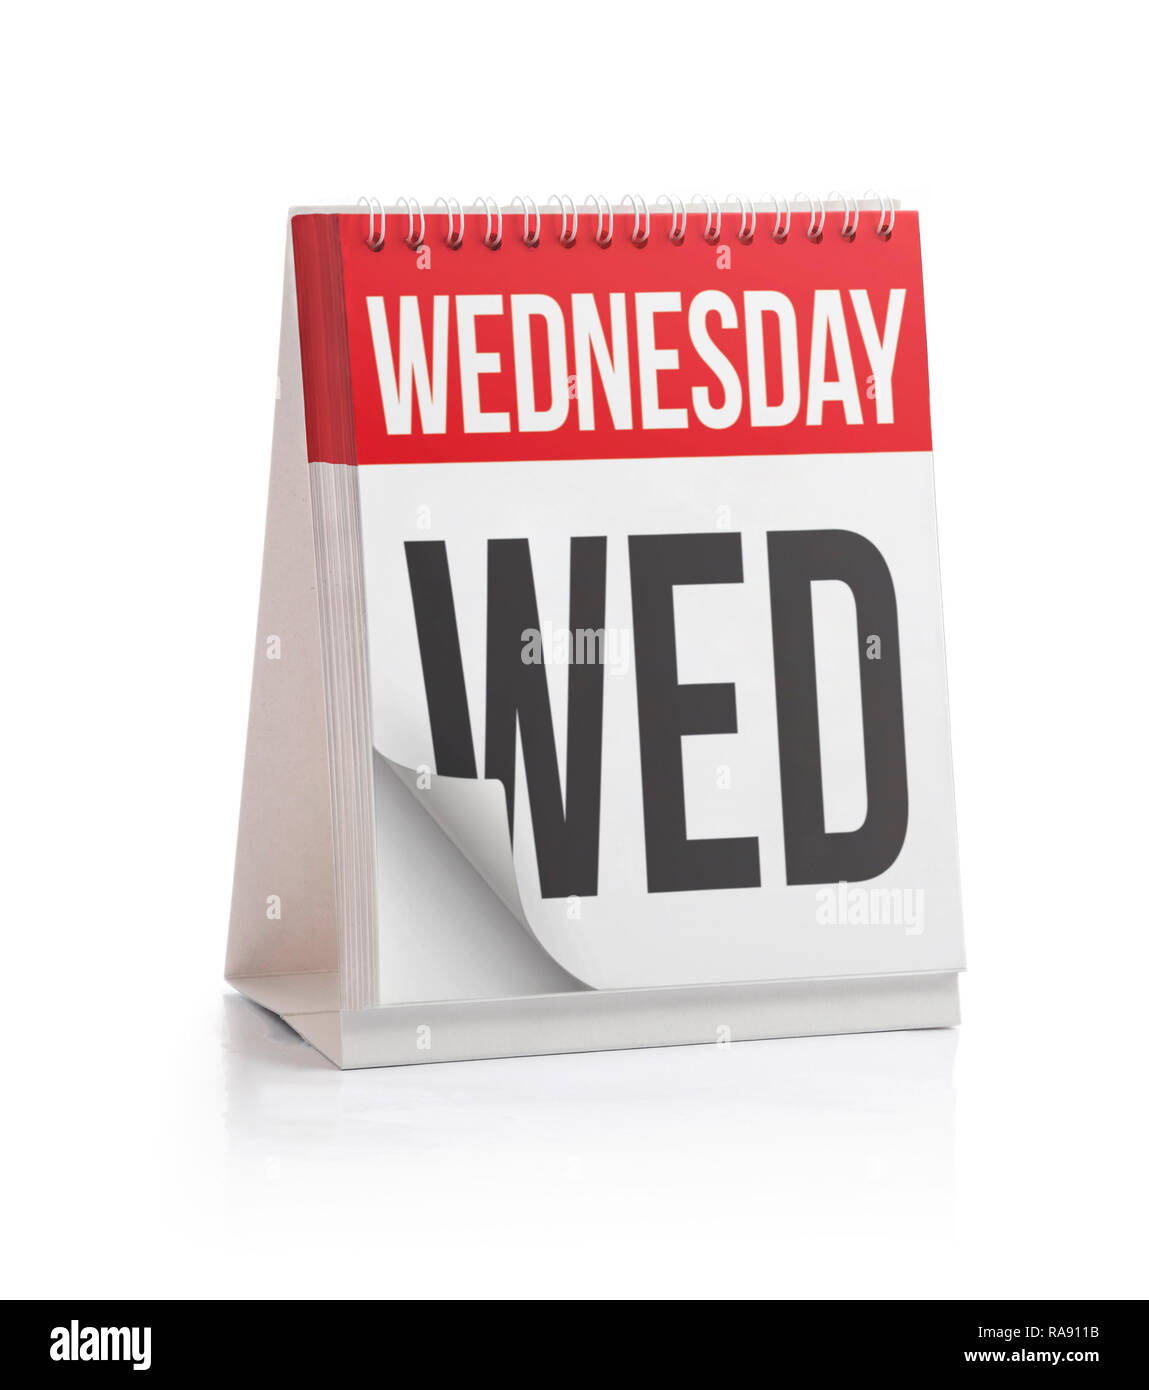 premium-photo-red-desktop-calendar-icon-showing-a-wednesday-page-on-a